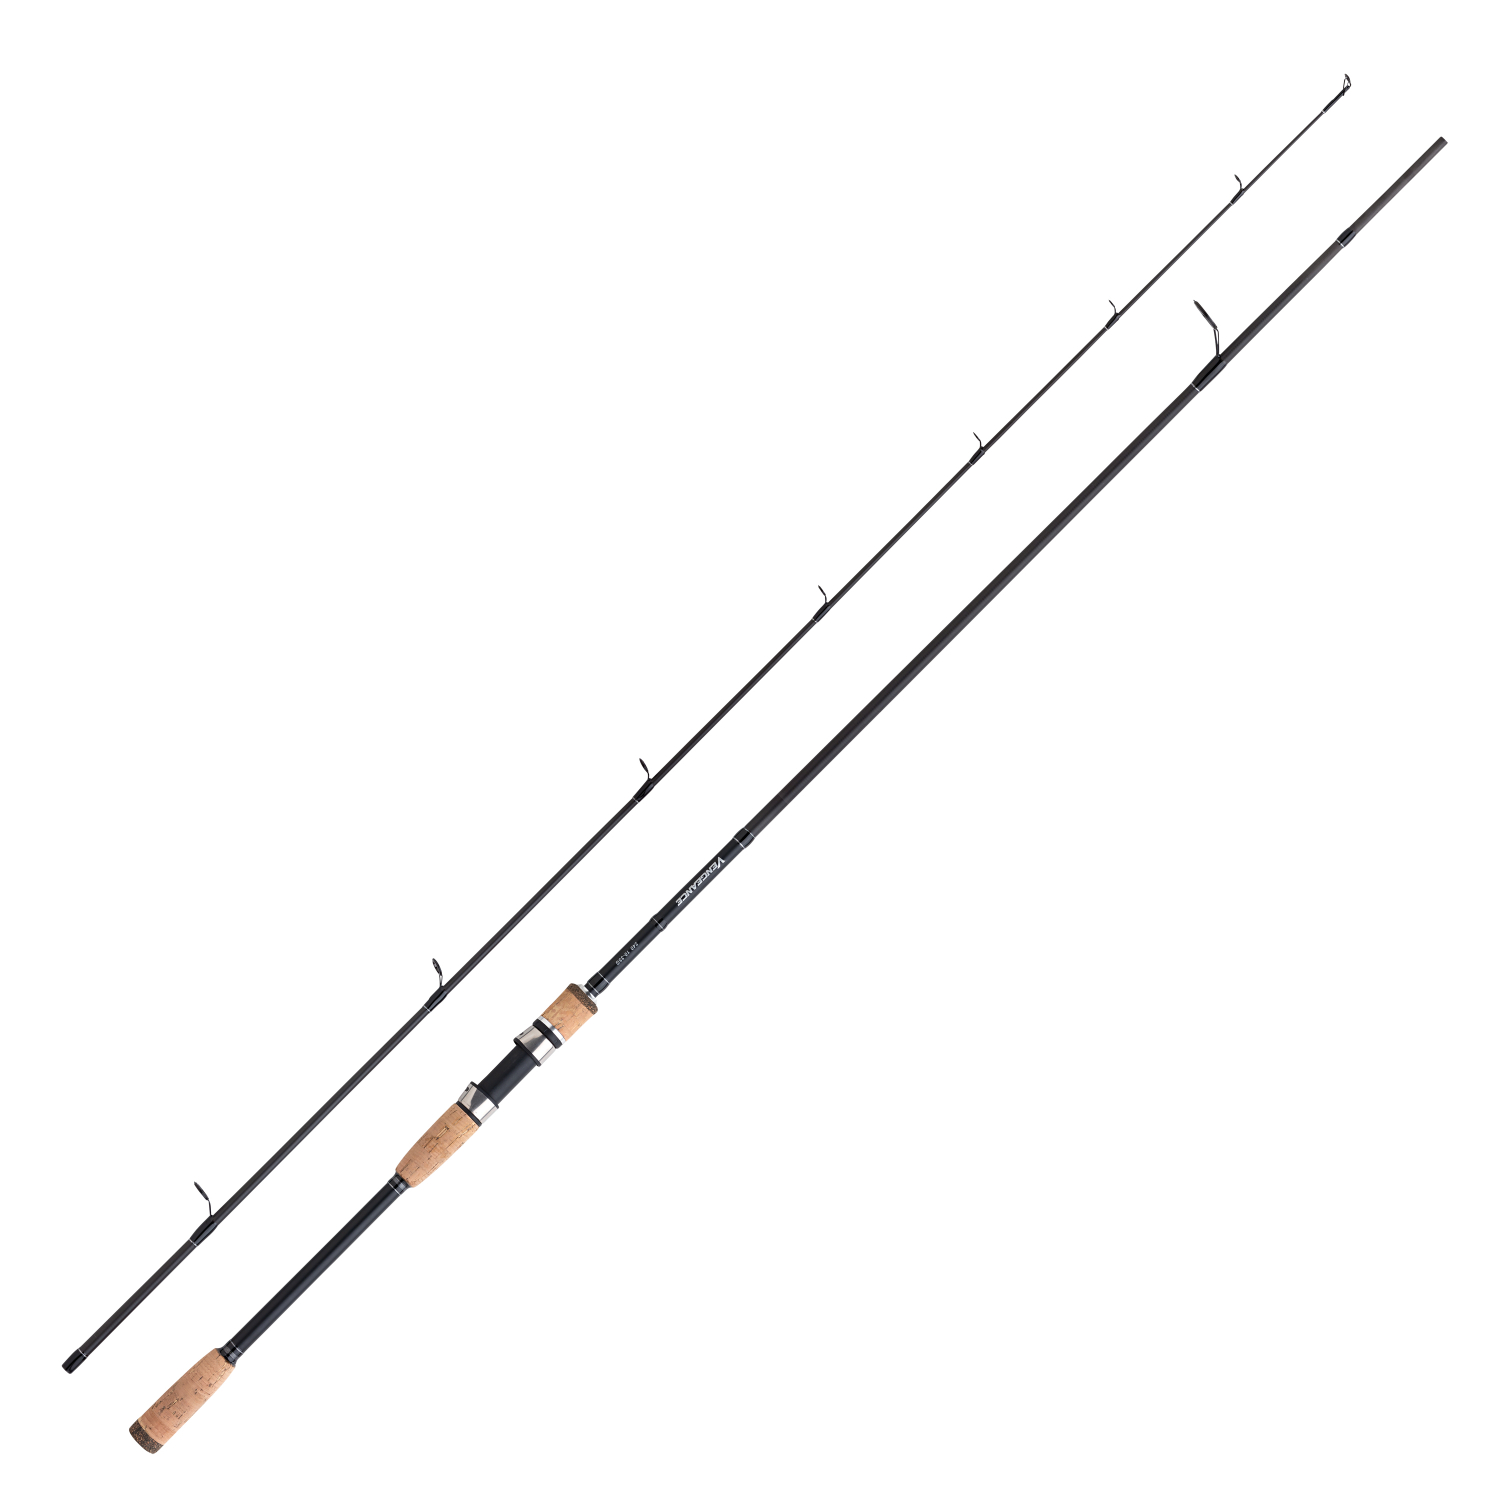 Shimano 17 Holiday pack 20-270T Spinning Bait casting Rod Fishing Black  Model